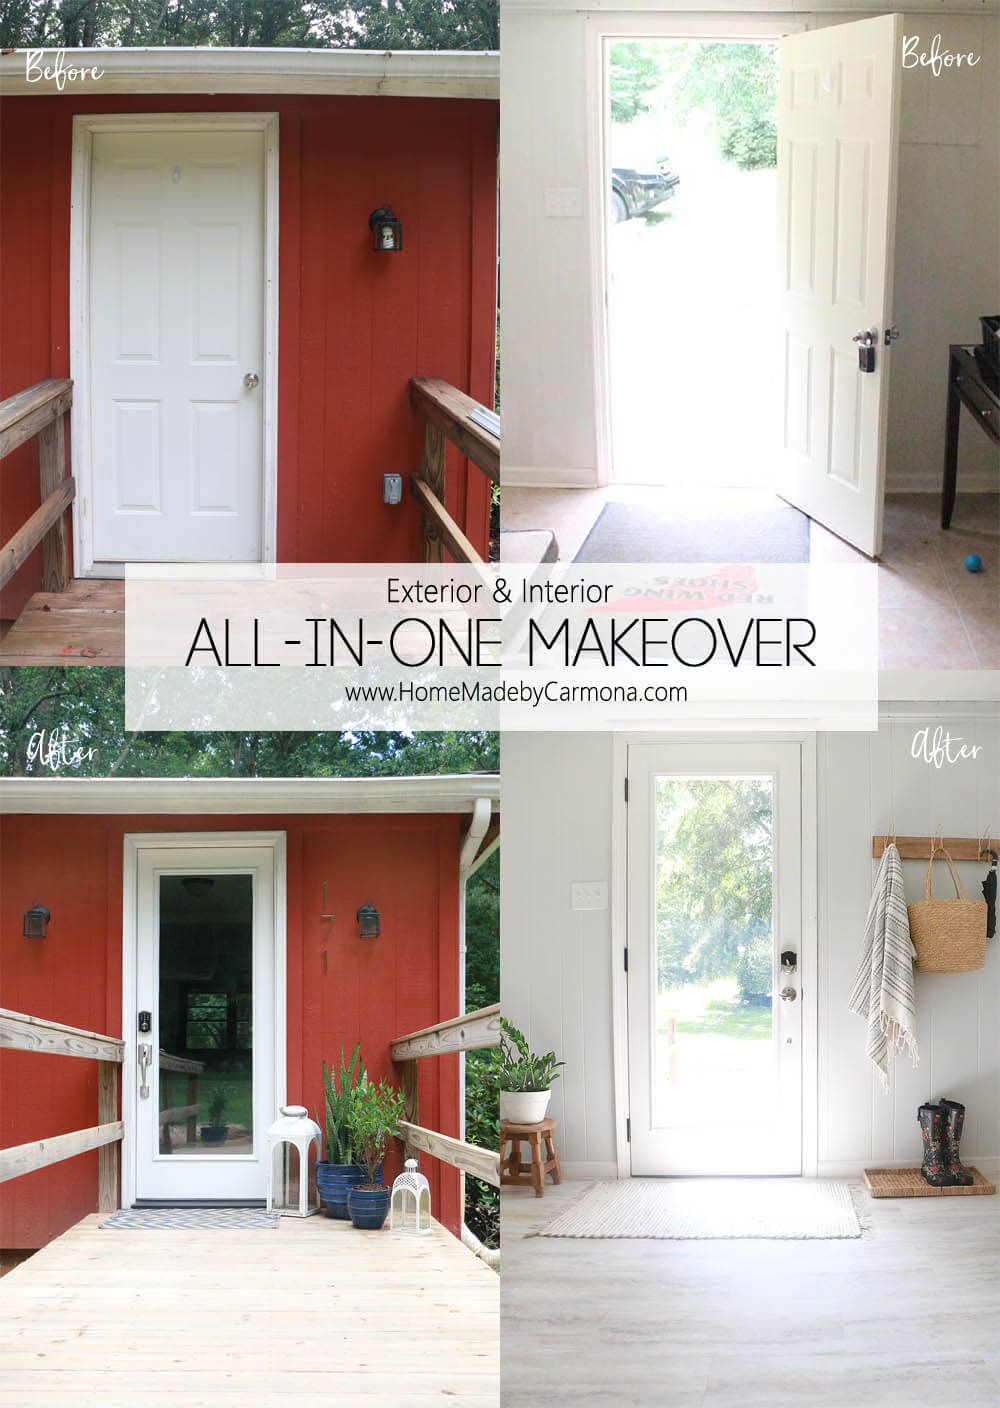 Exterior and Interior Makeover In One